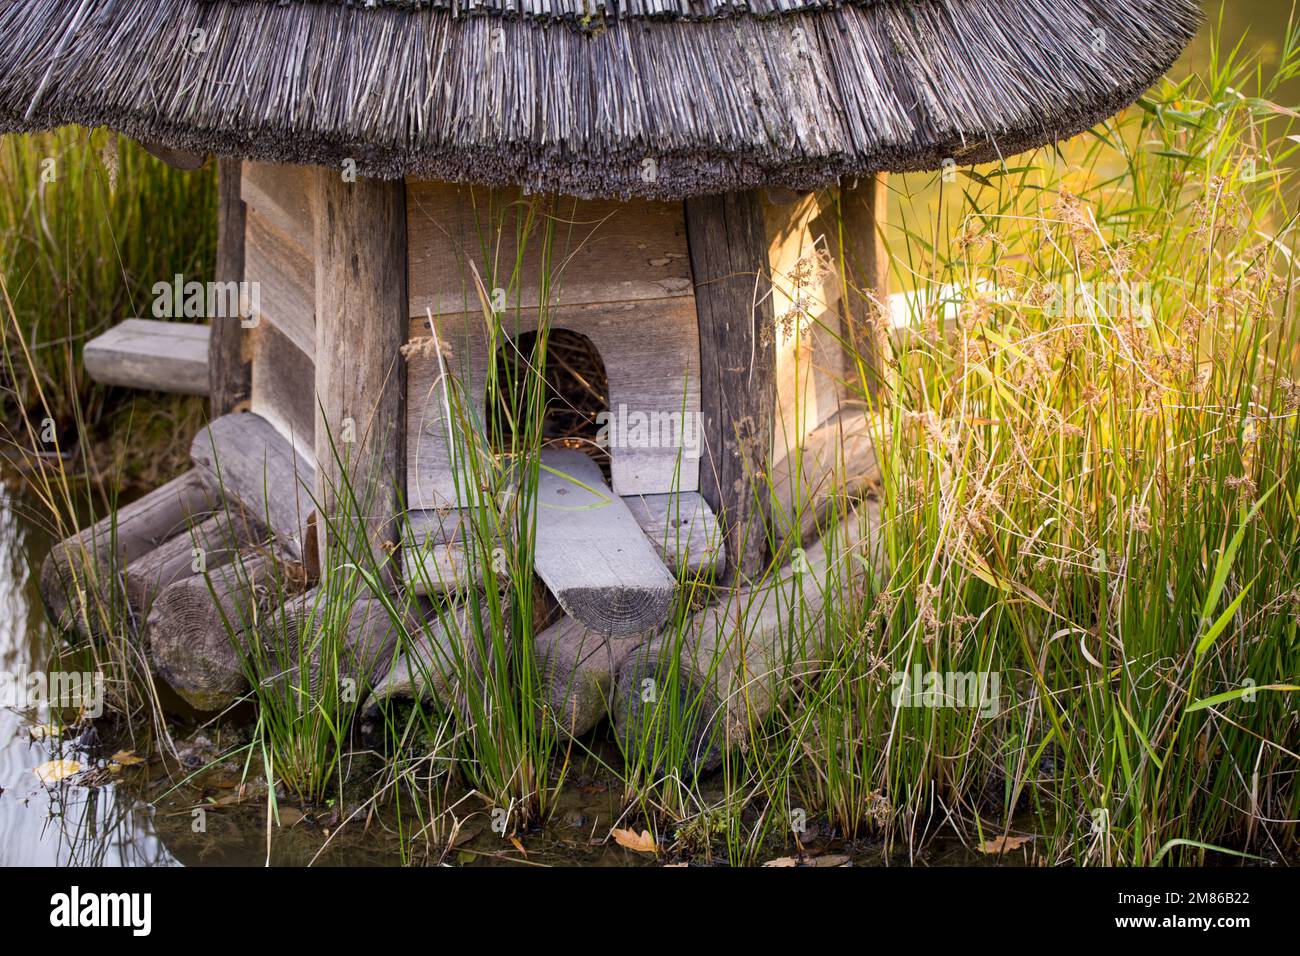 Wooden birdhouse on the water, roof made of straw. Stock Photo